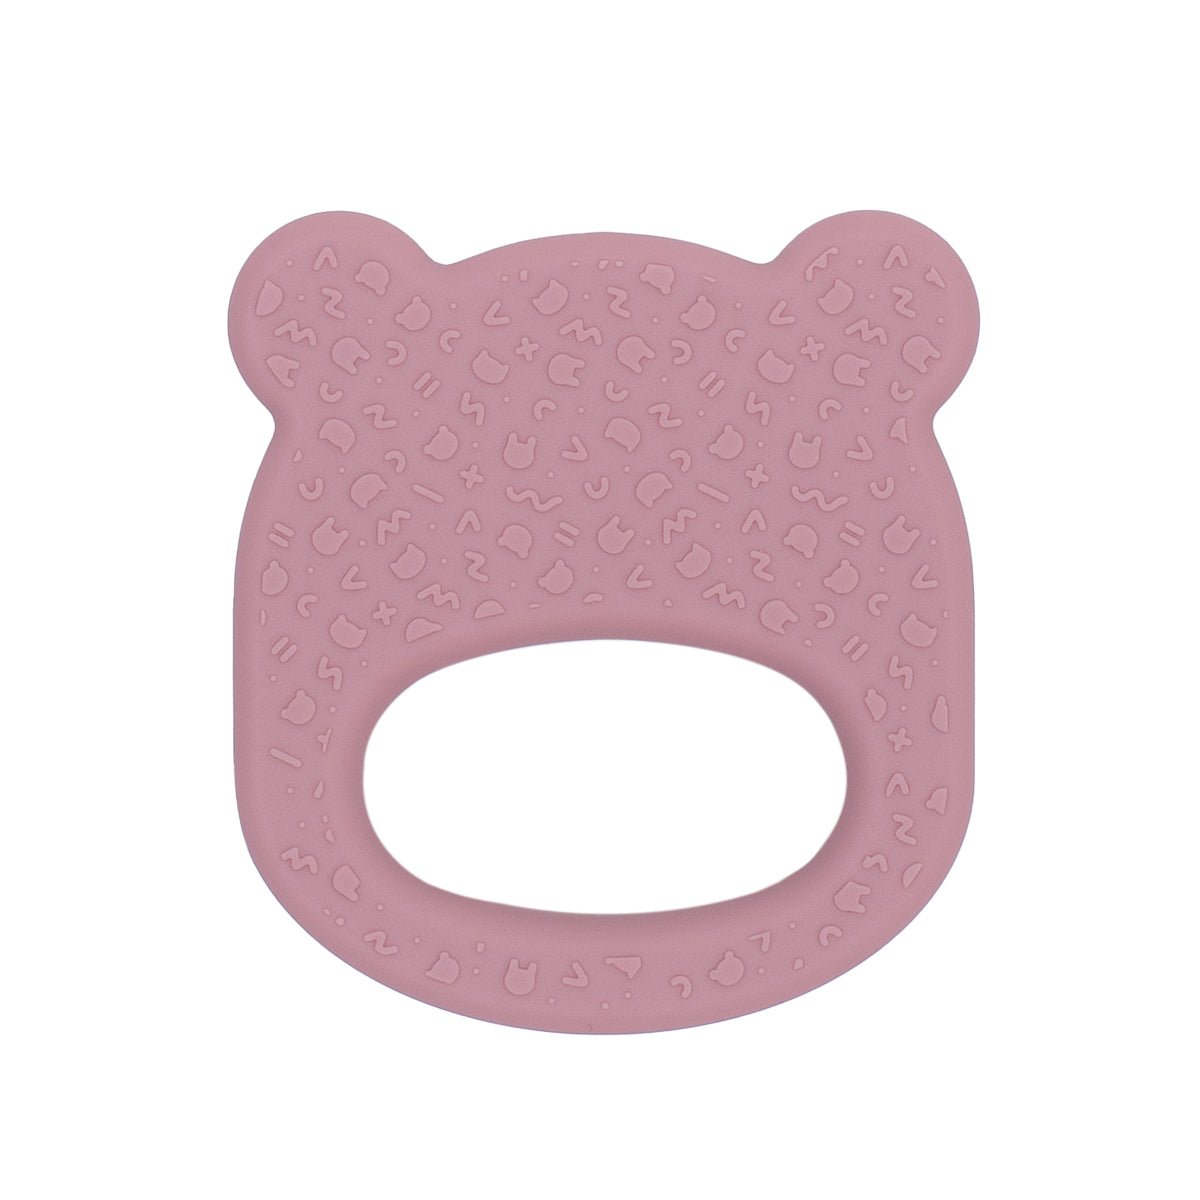 Our silicone bear teething ring in Dusty Rose